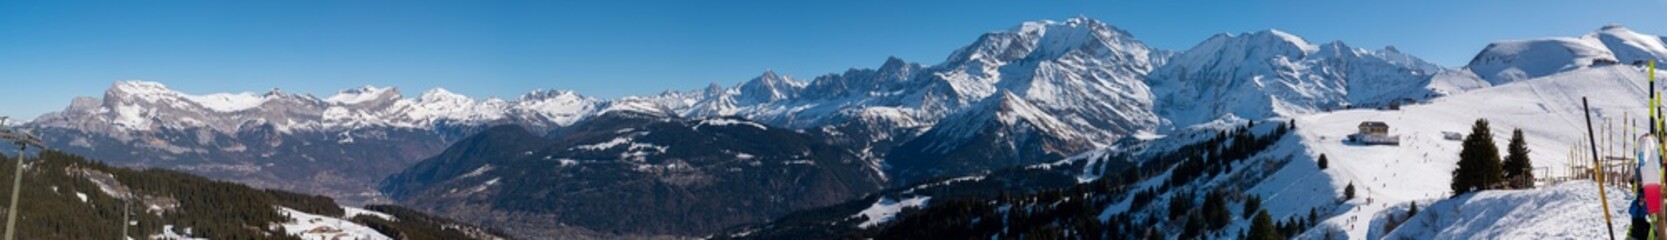 Majestic snow-capped Mont Blanc mountain range, with lush evergreen trees dotting the landscape